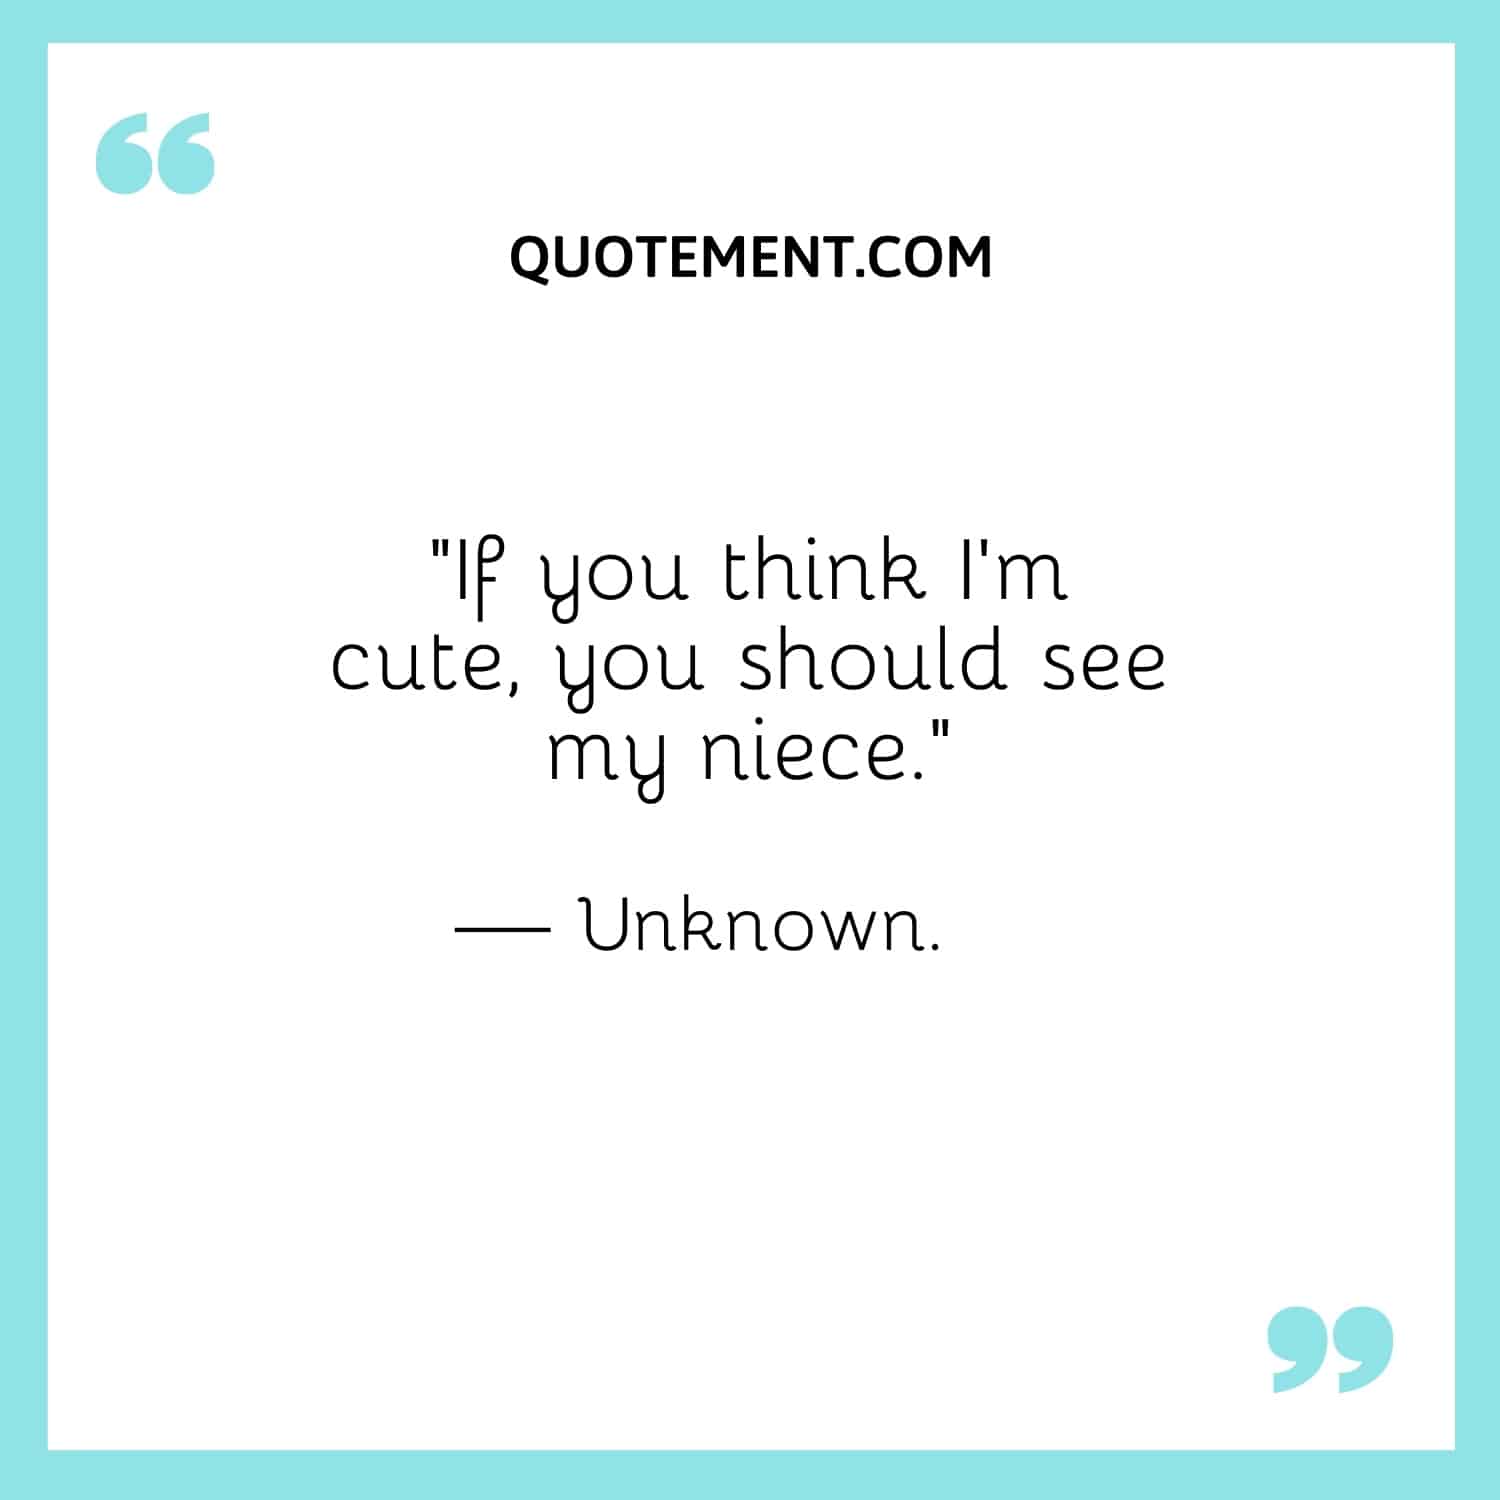 “If you think I’m cute, you should see my niece.” — Unknown